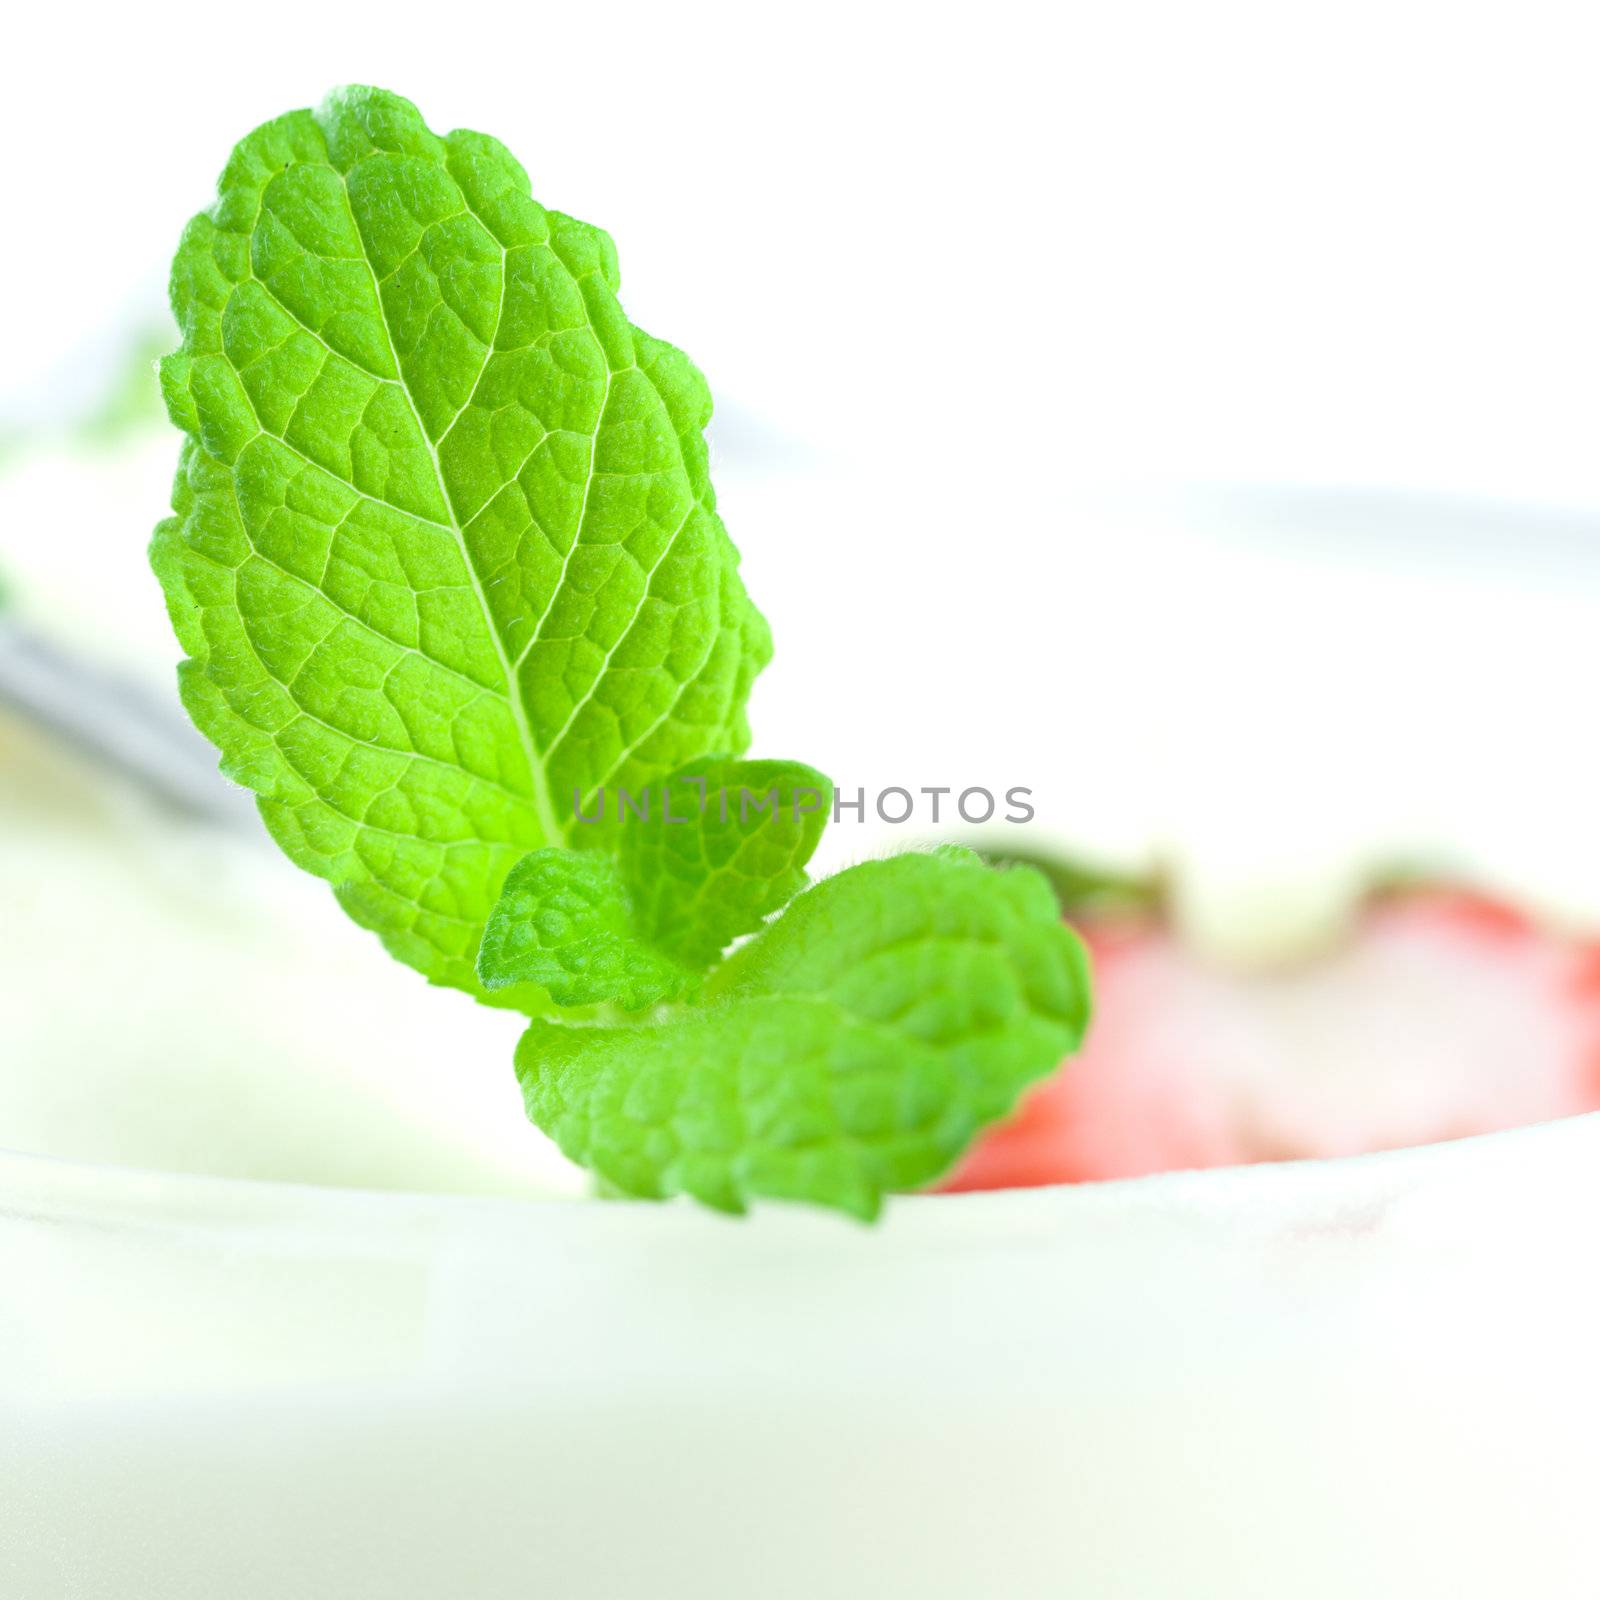 ice cream with mint and strawberry by jannyjus